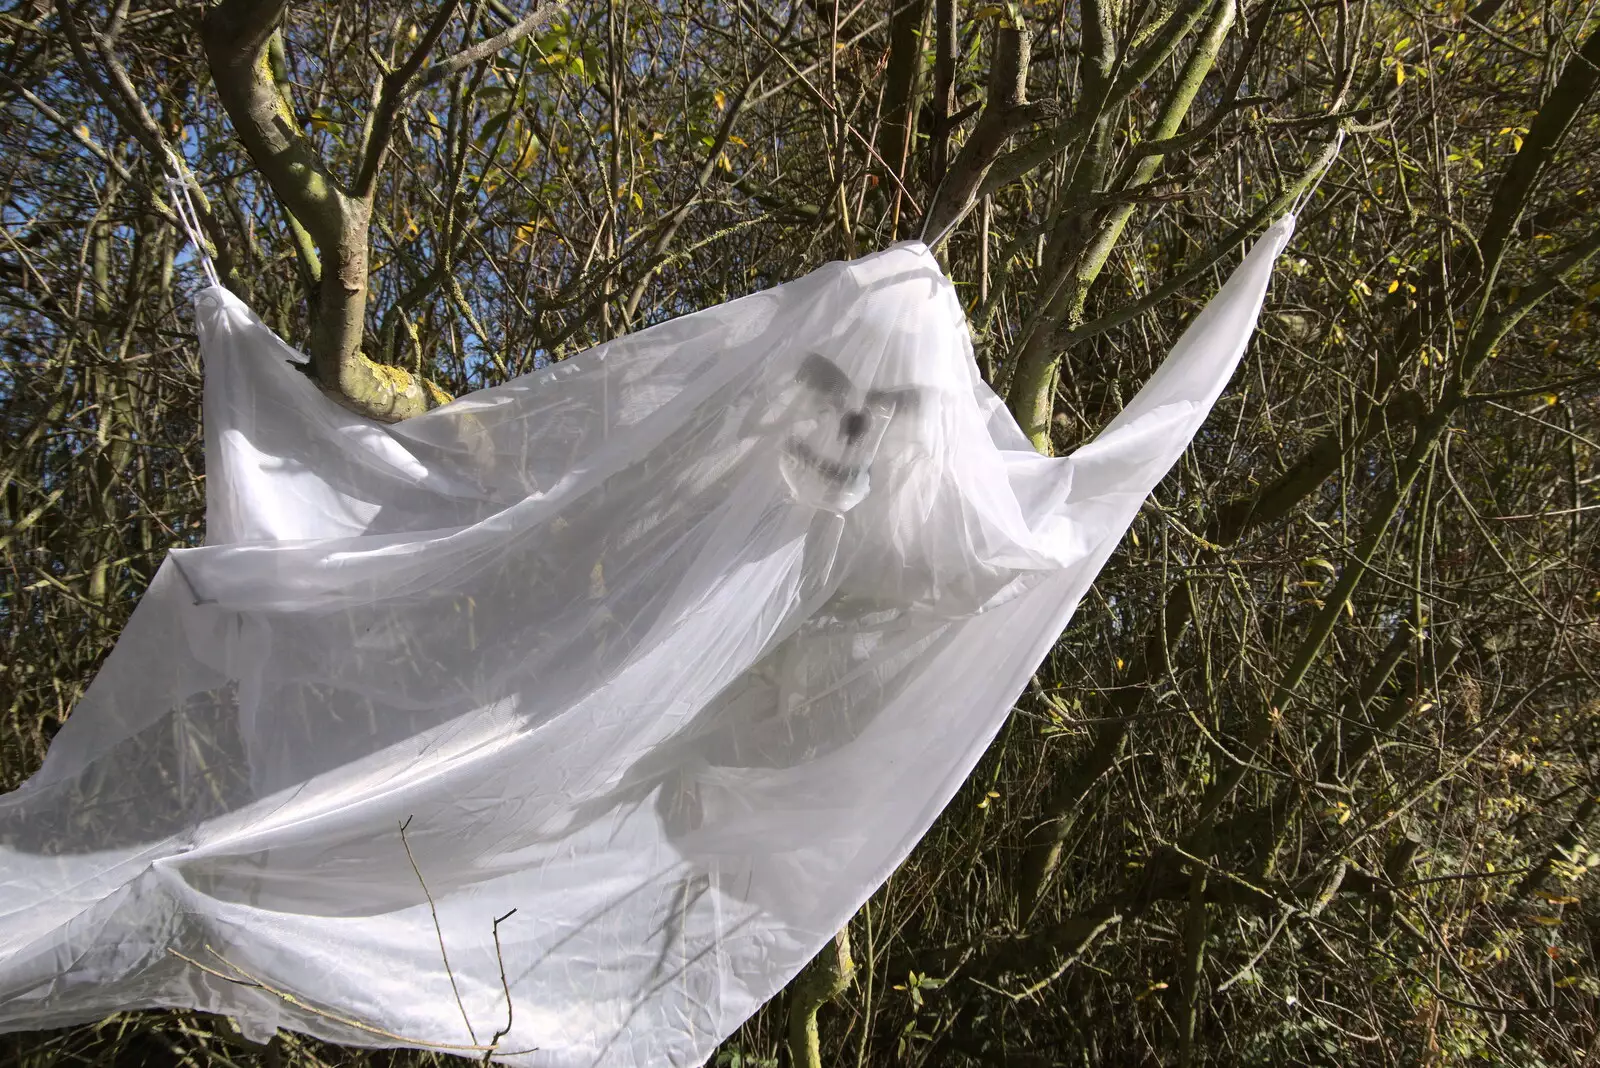 There's a cool ghoul in a bush, from A Few Hours at Alton Water, Stutton, Suffolk - 22nd October 2022